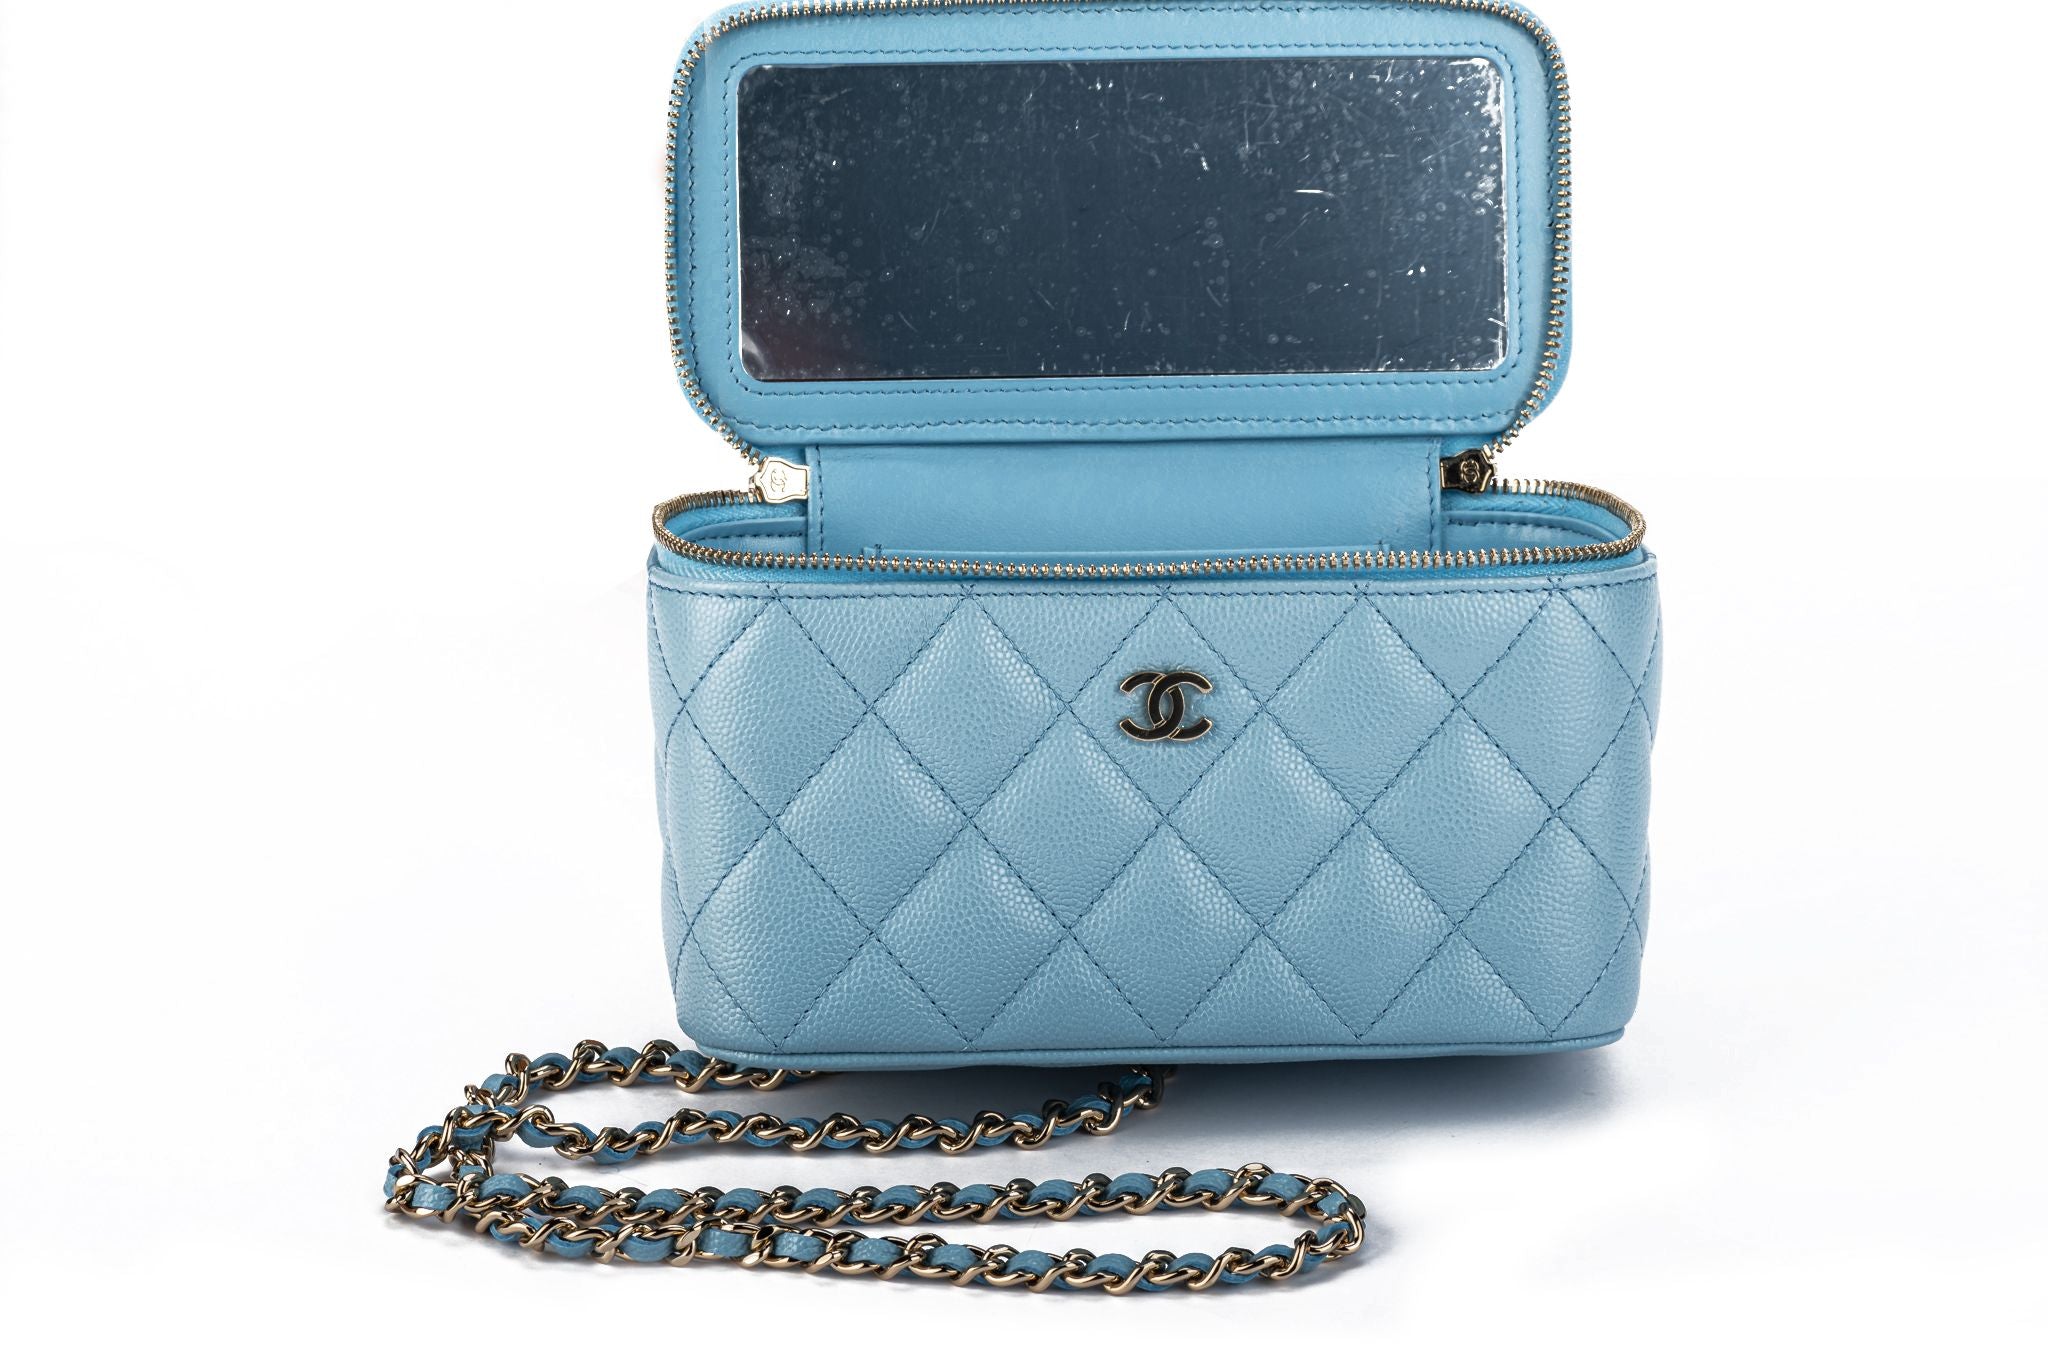 Chanel New 2022 Celeste Small Trunk Bag - Vintage Lux